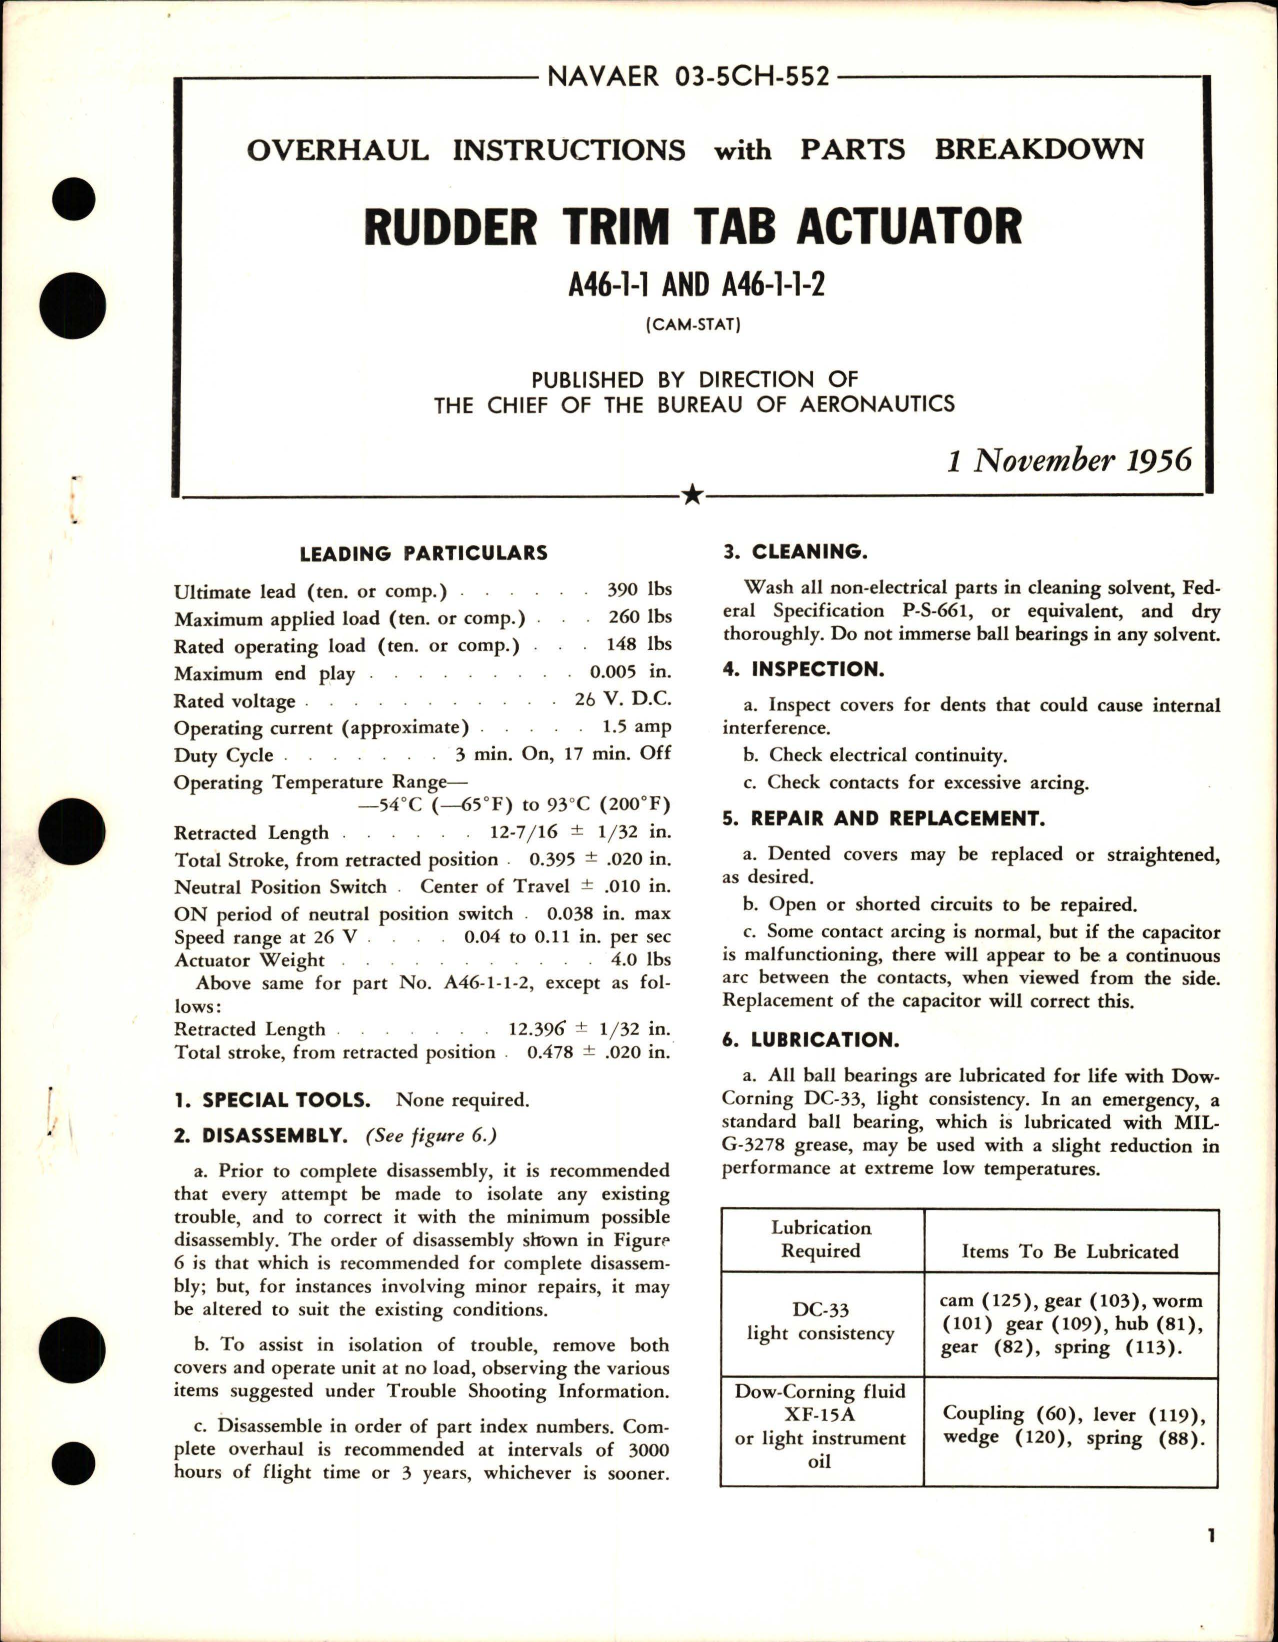 Sample page 1 from AirCorps Library document: Overhaul Instructions with Parts Breakdown for Rudder Trim Tab Actuator - A46-1-1 and A46-1-1-2 